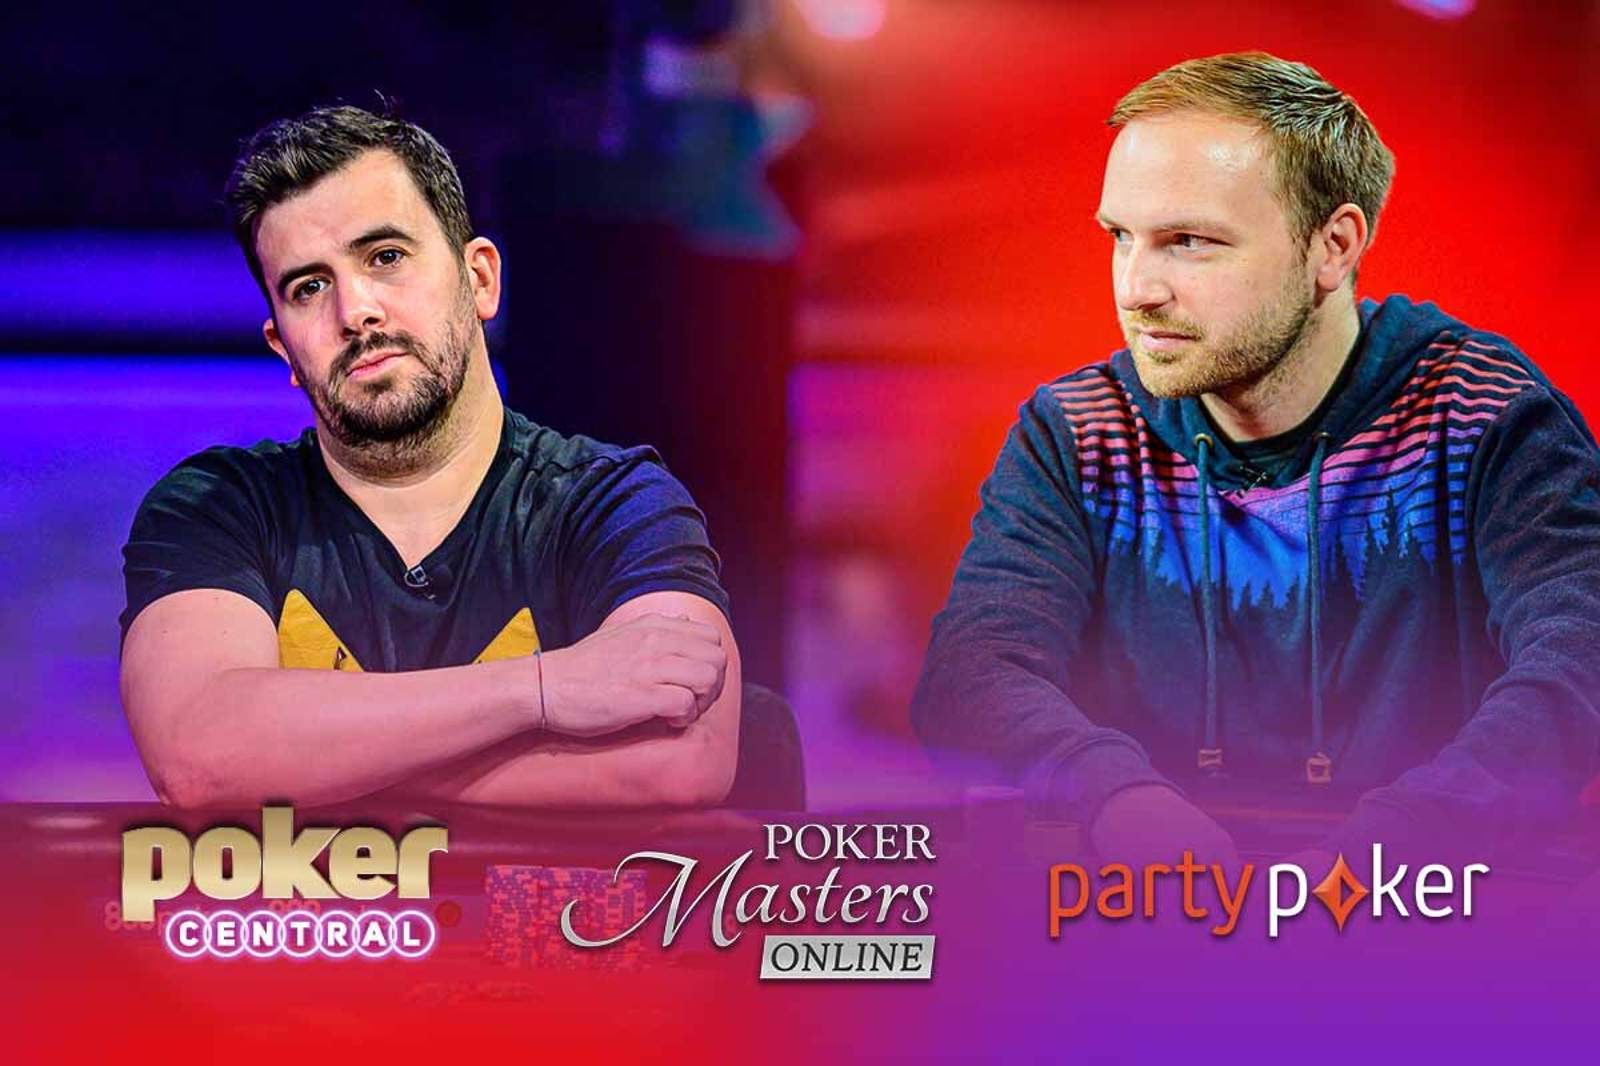 Big Wins for Watson & Nemeth on Day 2 of Poker Masters Online